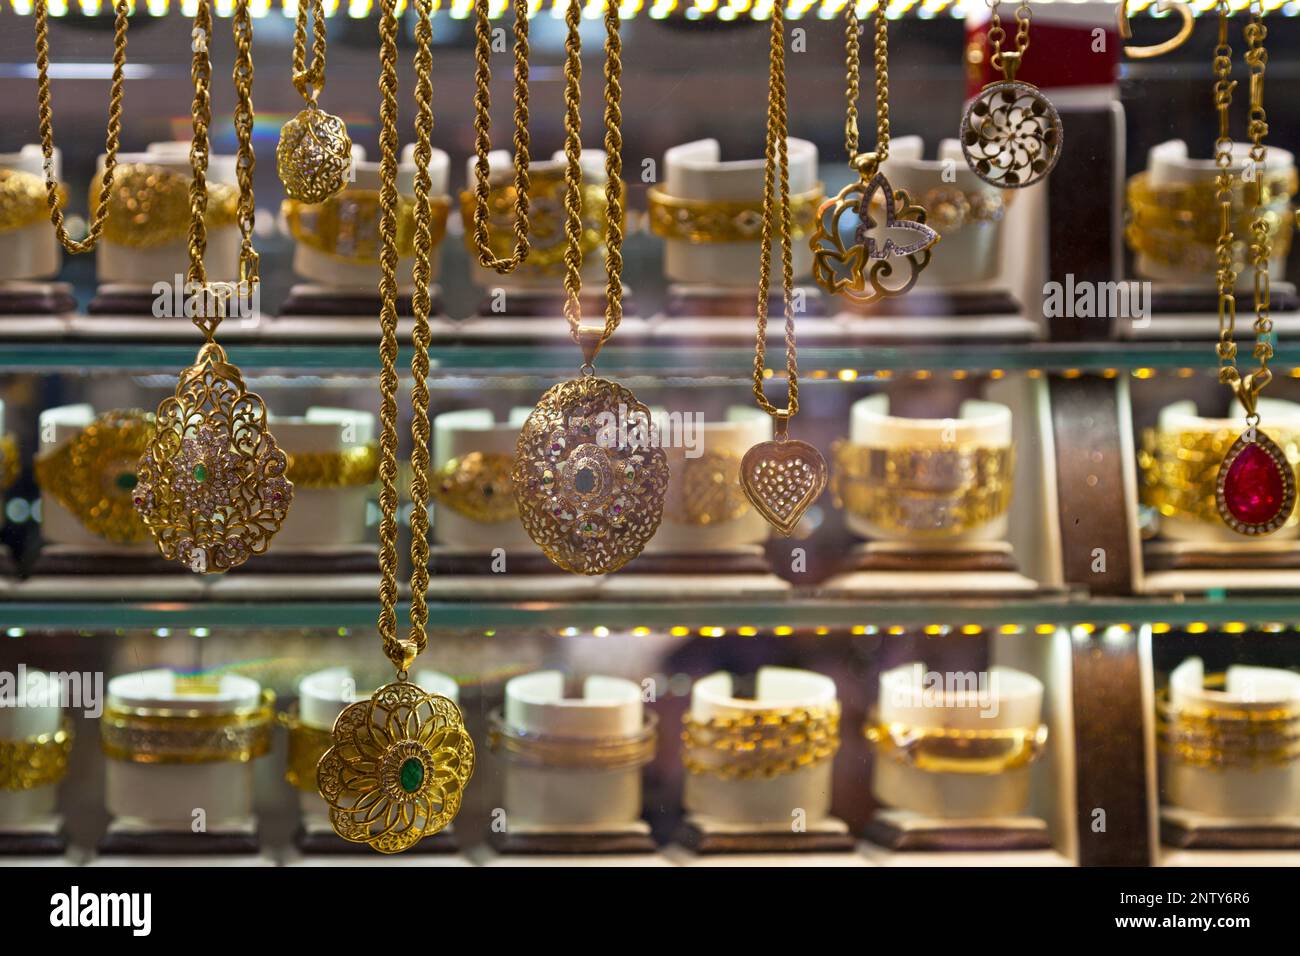 Gold jewelry for sale in the window of a jewelry shop in the old town of Fes, Morocco. Stock Photo